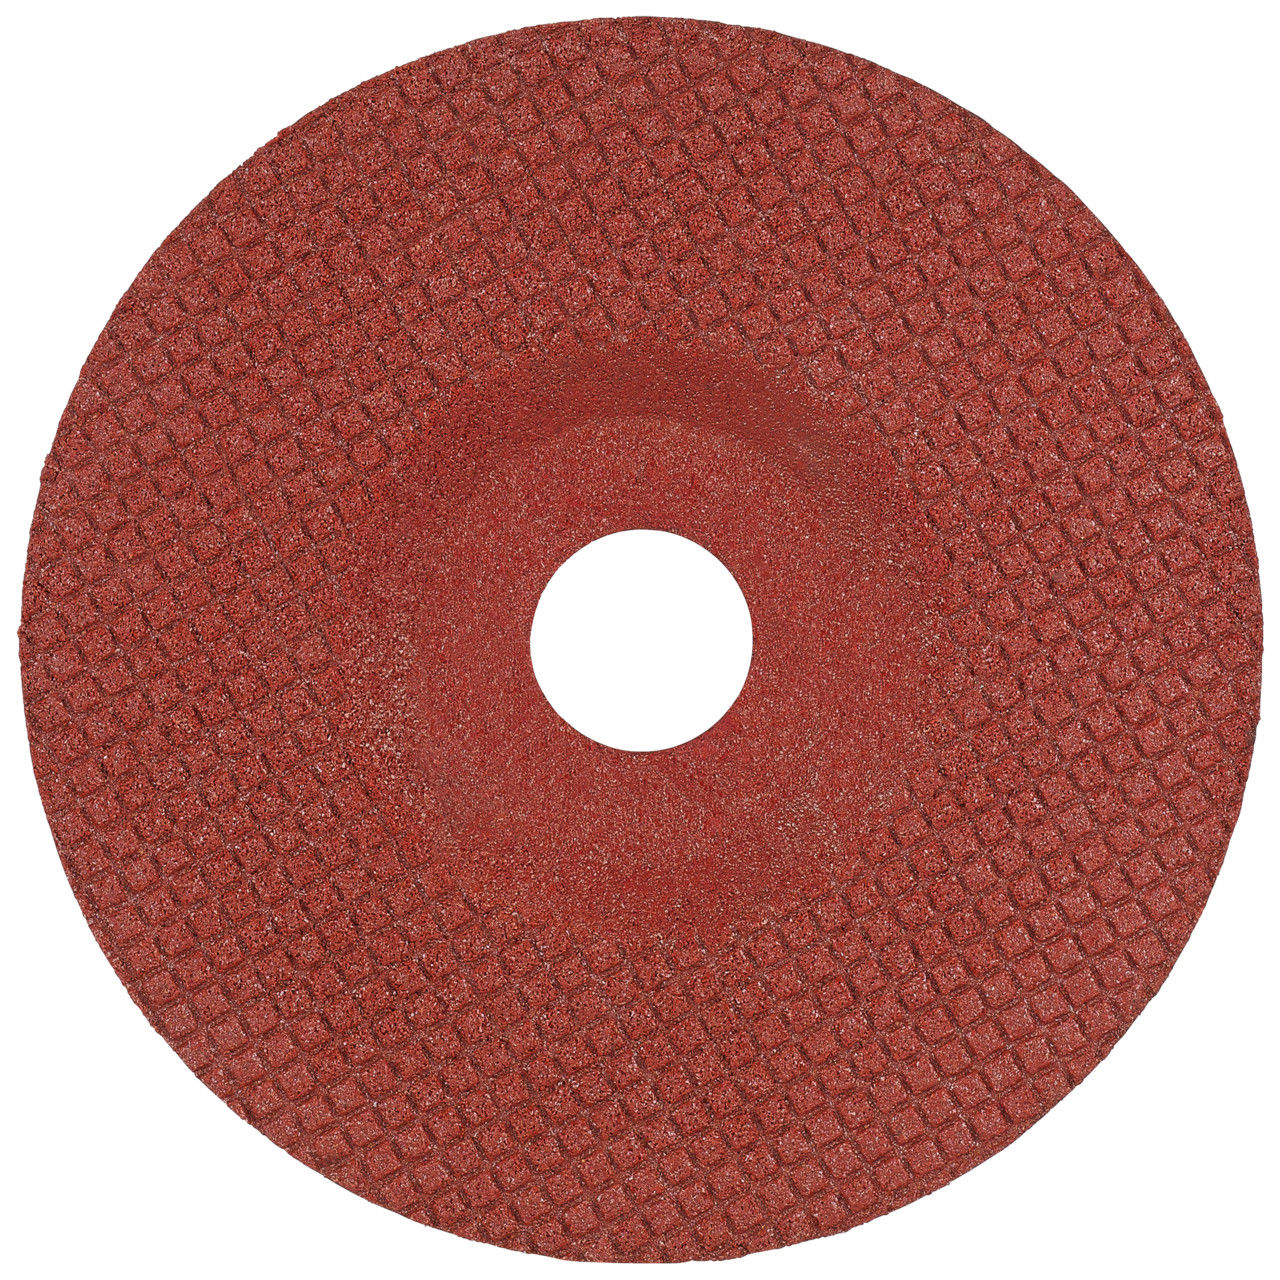 TYROLIT grinding wheel DxH 115x22.23 TOUCH for stainless steel and non-ferrous metals, shape: 29T - offset version, Art. 236318